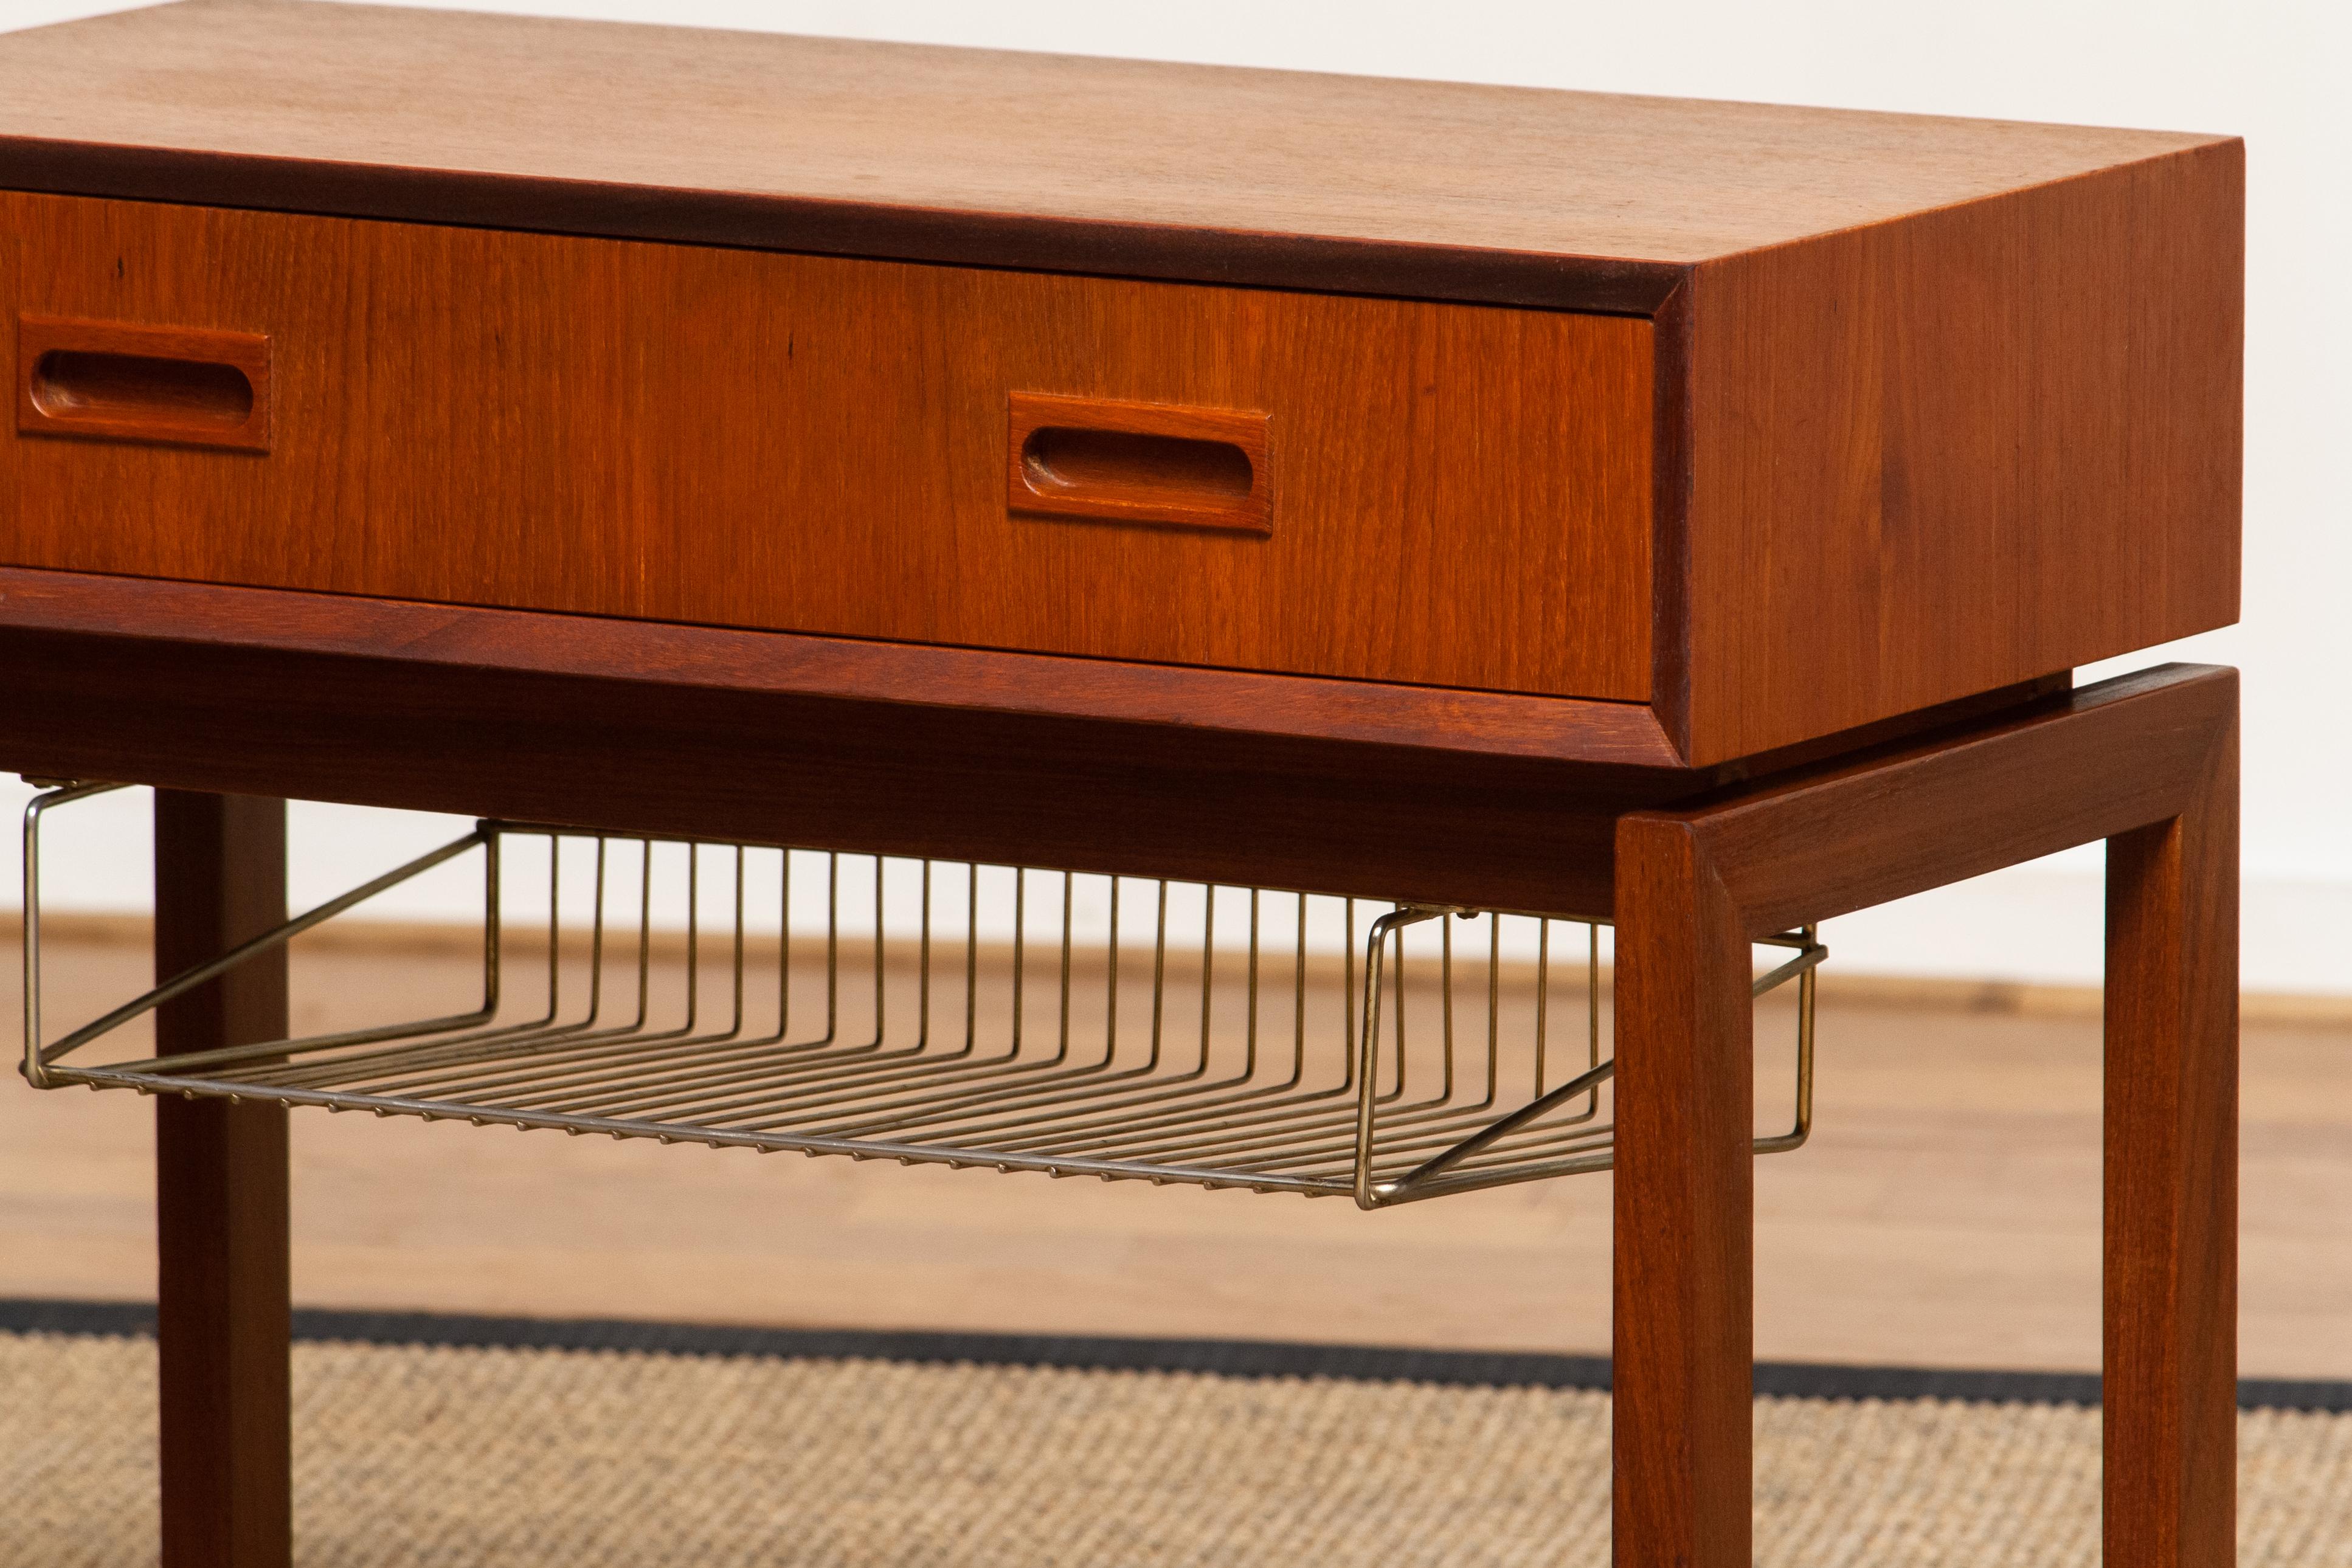 1960's Teak Hall Cabinet Side Table from Denmark with Brass Paper Rack 2